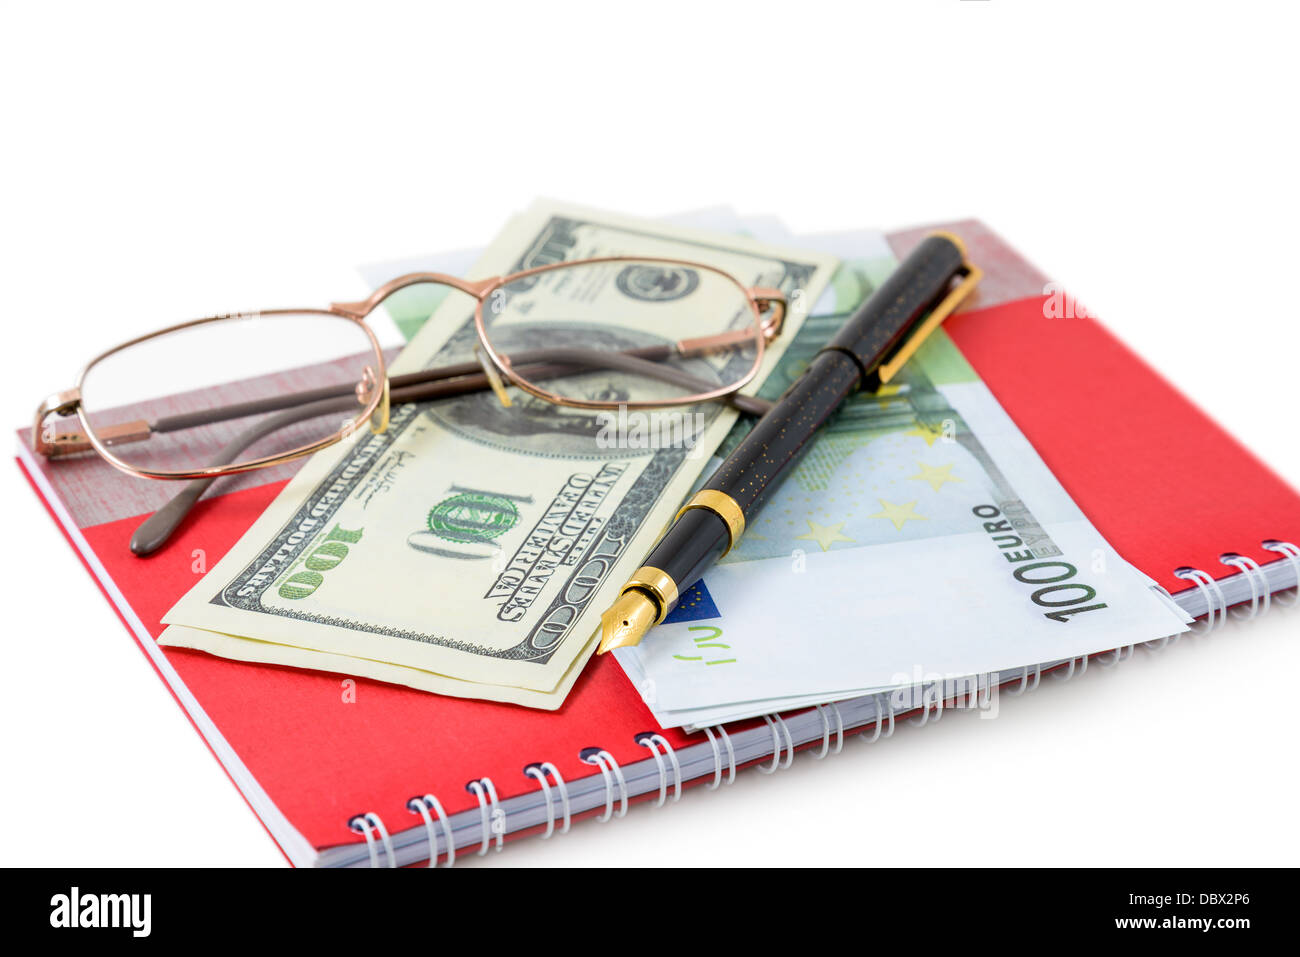 The pen, spectacles, dollars, euro are lying on a red notebook Stock Photo